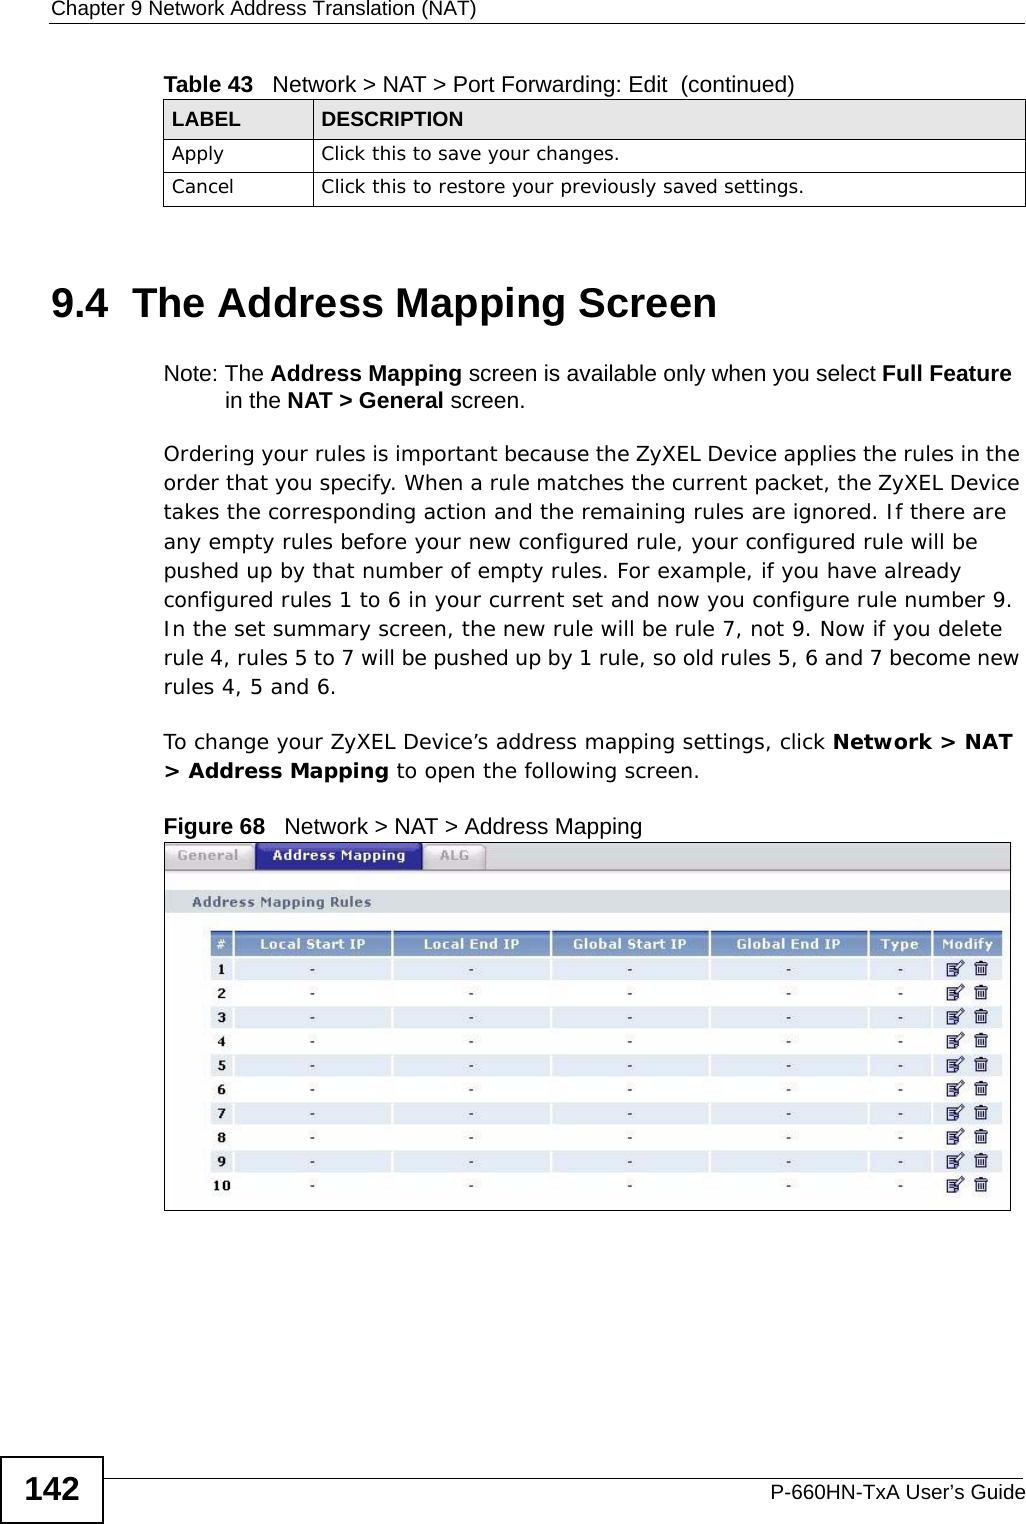 Chapter 9 Network Address Translation (NAT)P-660HN-TxA User’s Guide1429.4  The Address Mapping ScreenNote: The Address Mapping screen is available only when you select Full Feature in the NAT &gt; General screen.Ordering your rules is important because the ZyXEL Device applies the rules in the order that you specify. When a rule matches the current packet, the ZyXEL Device takes the corresponding action and the remaining rules are ignored. If there are any empty rules before your new configured rule, your configured rule will be pushed up by that number of empty rules. For example, if you have already configured rules 1 to 6 in your current set and now you configure rule number 9. In the set summary screen, the new rule will be rule 7, not 9. Now if you delete rule 4, rules 5 to 7 will be pushed up by 1 rule, so old rules 5, 6 and 7 become new rules 4, 5 and 6. To change your ZyXEL Device’s address mapping settings, click Network &gt; NAT &gt; Address Mapping to open the following screen.Figure 68   Network &gt; NAT &gt; Address MappingApply Click this to save your changes.Cancel Click this to restore your previously saved settings.Table 43   Network &gt; NAT &gt; Port Forwarding: Edit  (continued)LABEL DESCRIPTION